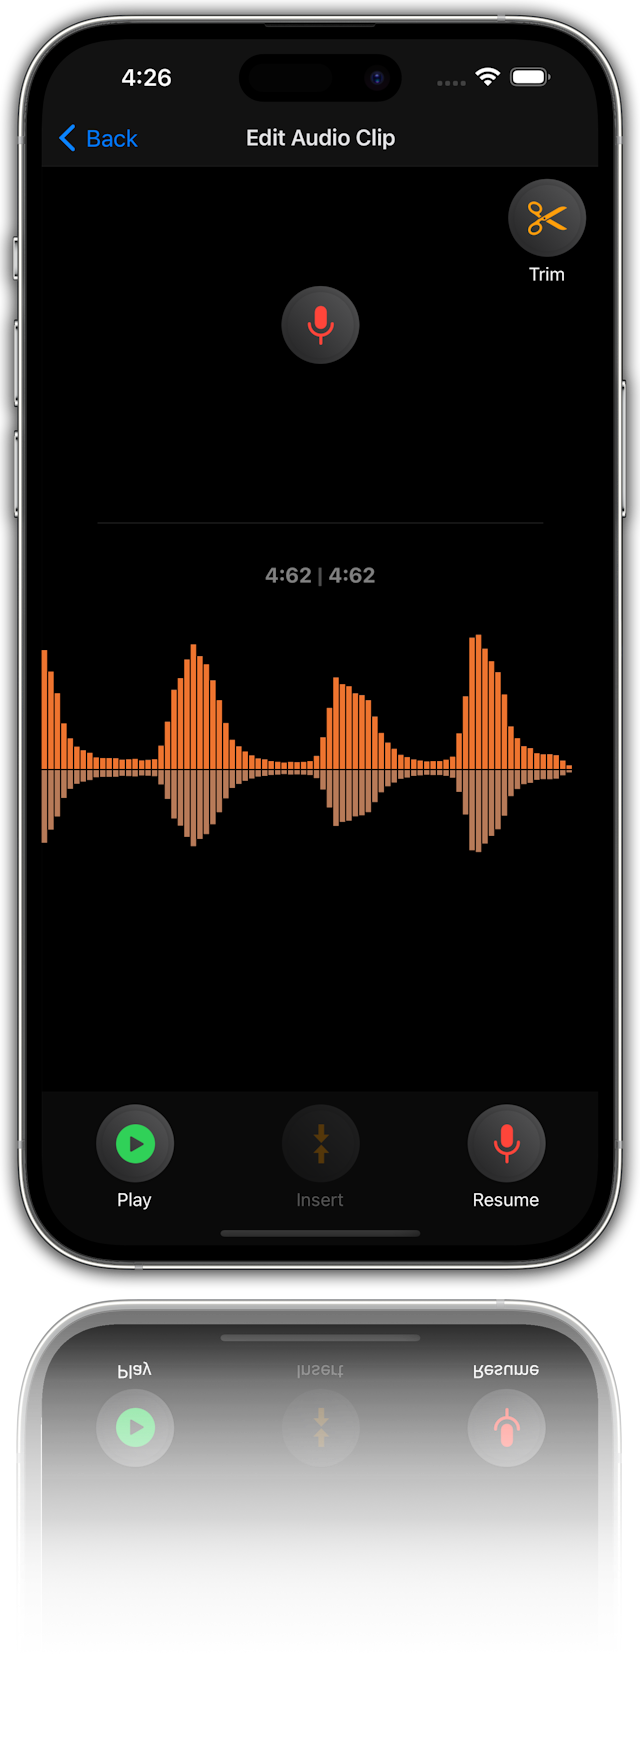 This is a screenshot of an audio editing screen. The app is in dark mode and the screen is mostly black with orange and white accents. The app is in the “Edit Audio Clip” screen. The screen shows a waveform of the audio clip. The waveform is orange in color. The screen has a “Trim” button on the top right corner. The screen has a “Play”, “Insert”, and “Resume” button on the bottom. The screen has a time stamp of “4:62 / 4:62” on the top center.